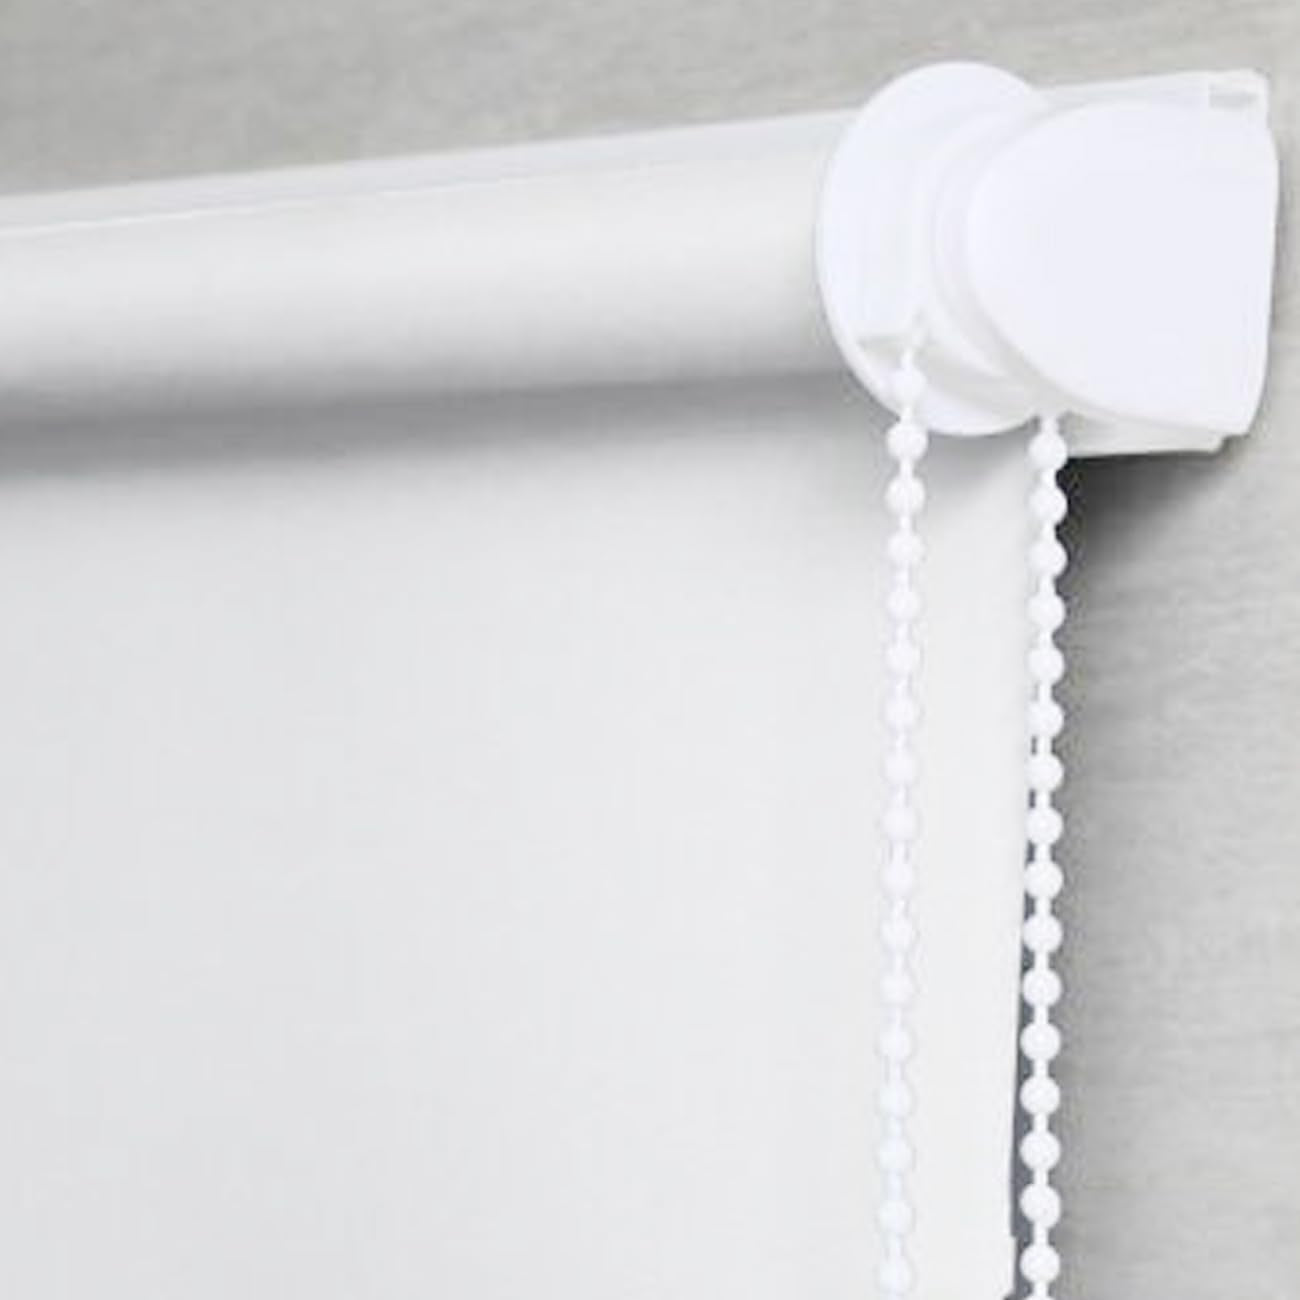 Blind Bead Chain Cord, Plastic Curtain Beaded Chain Cord with 20Pcs Connector Clips Repair for Vertical Roller and Roman Shade Chain Cord (White, 10 Meters/10.94 Yards)